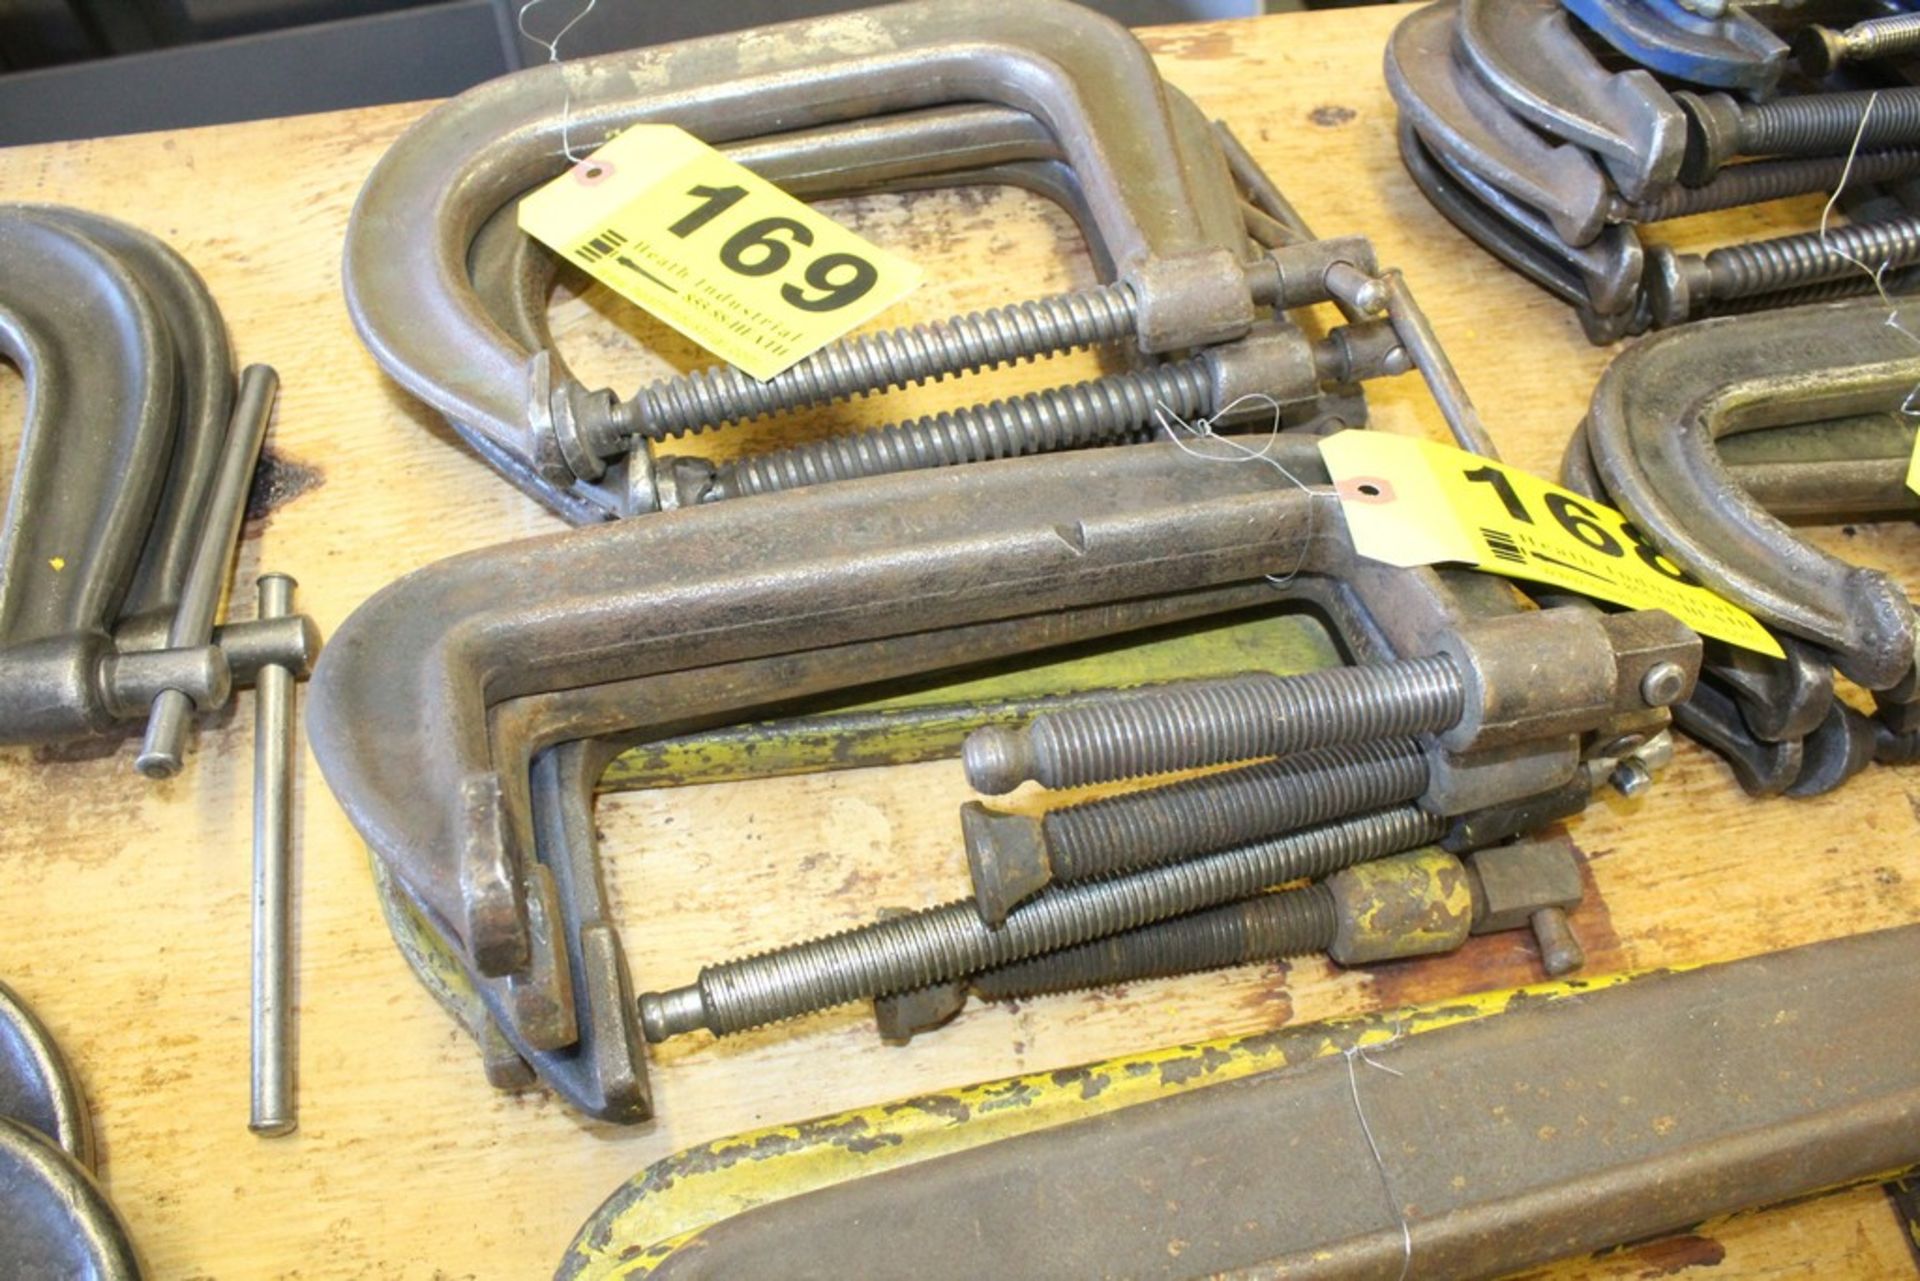 (3) 8" C-CLAMPS